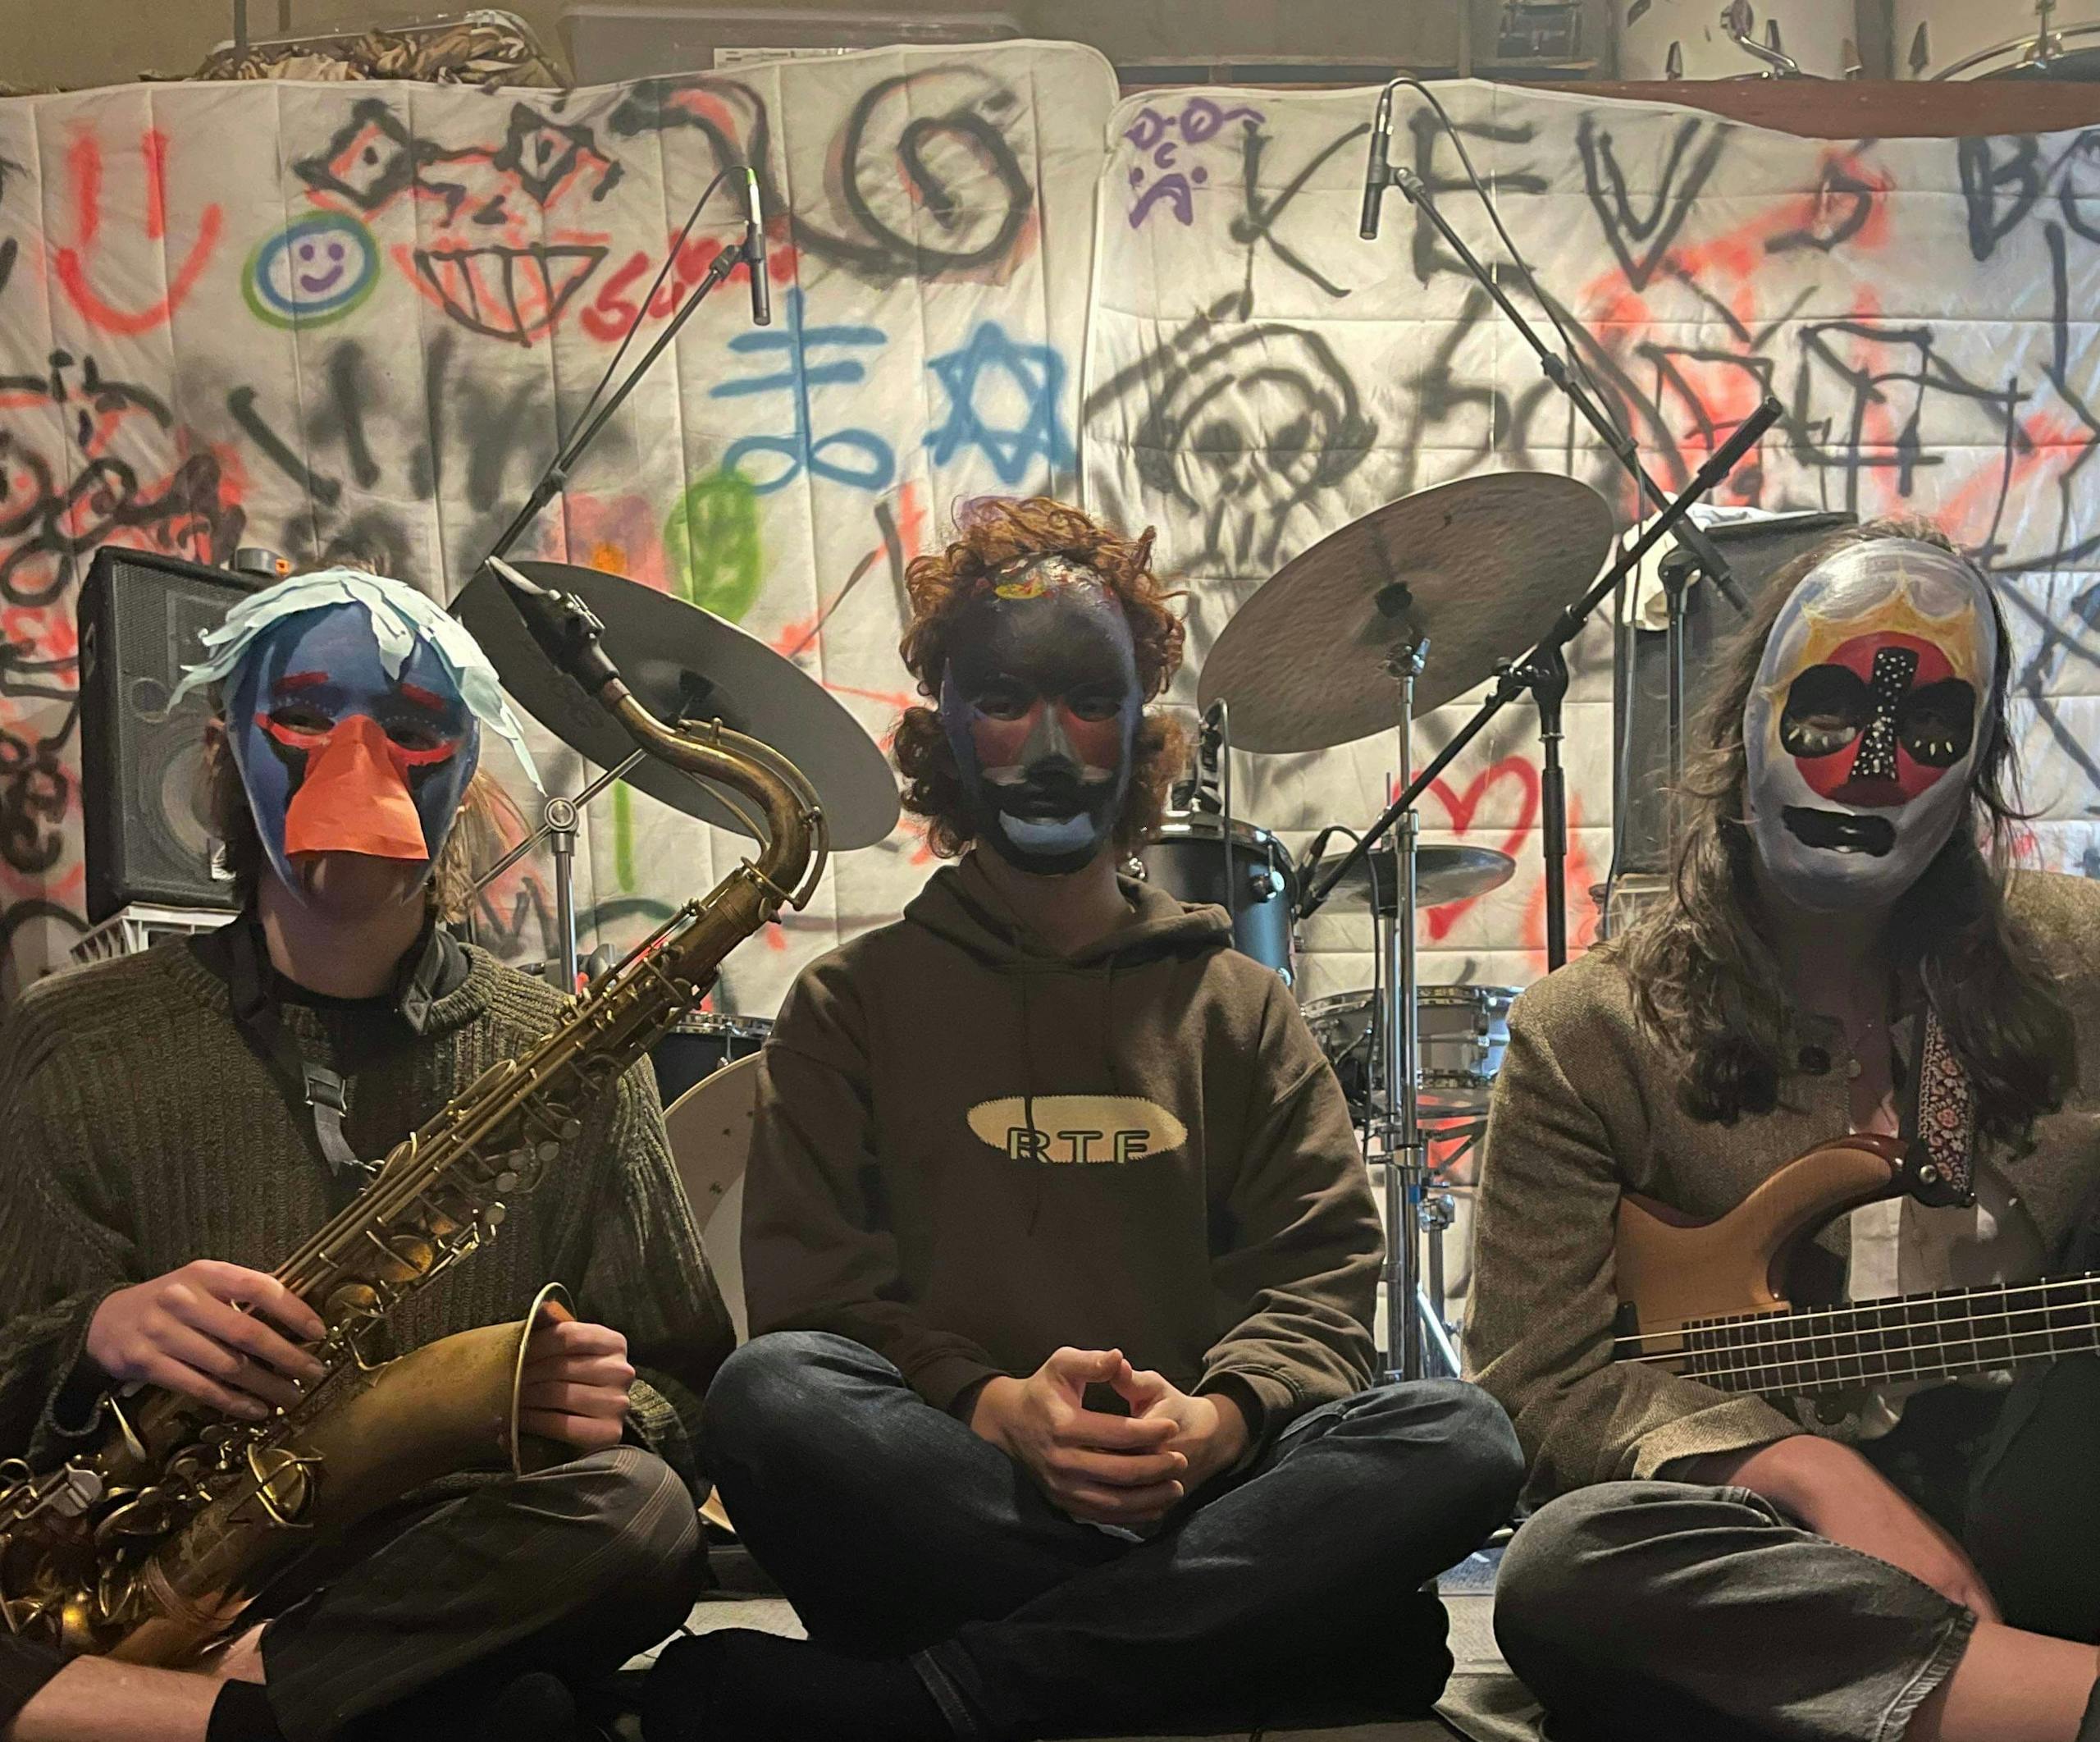 Three people wearing masks with graffiti behind them